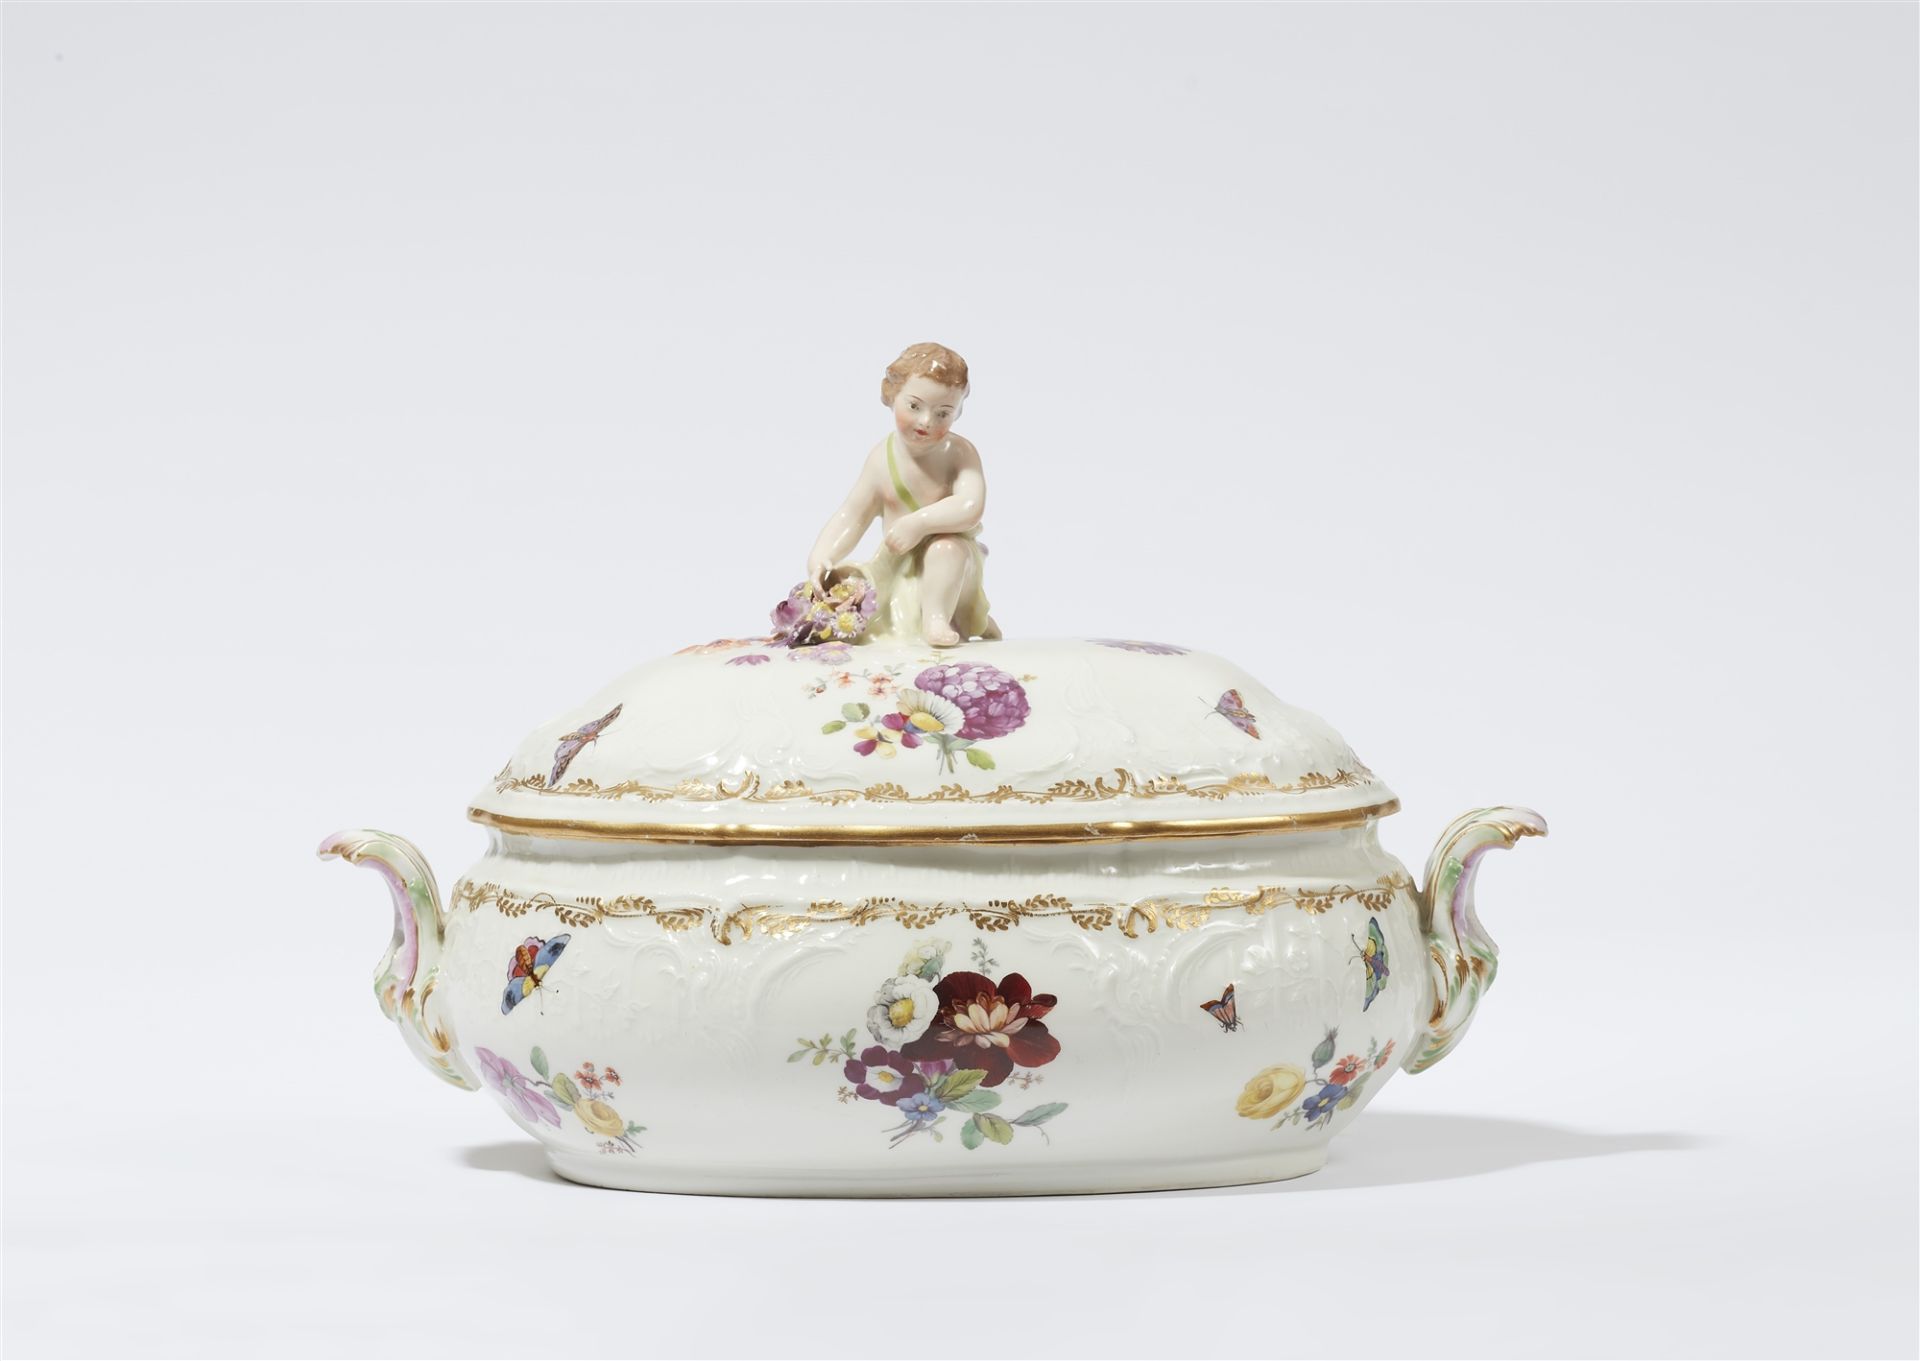 An oval Berlin KPM porcelain tureen and cover from the dinner service for Berlin Palace